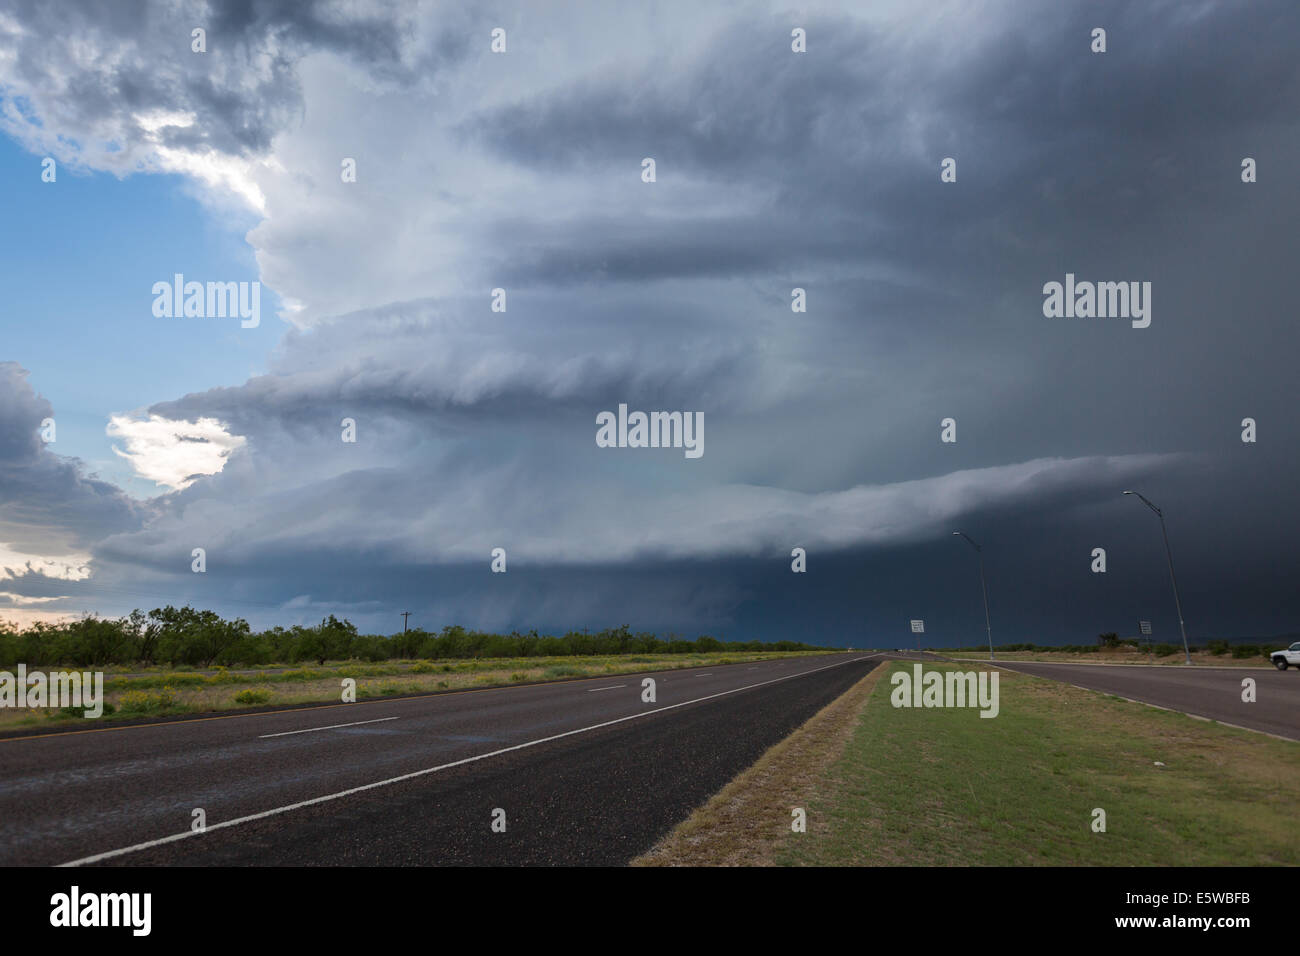 A powerful tornado warned supercell thunderstorm with a large wall cloud dominates the Texas sky while producing severe weather Stock Photo